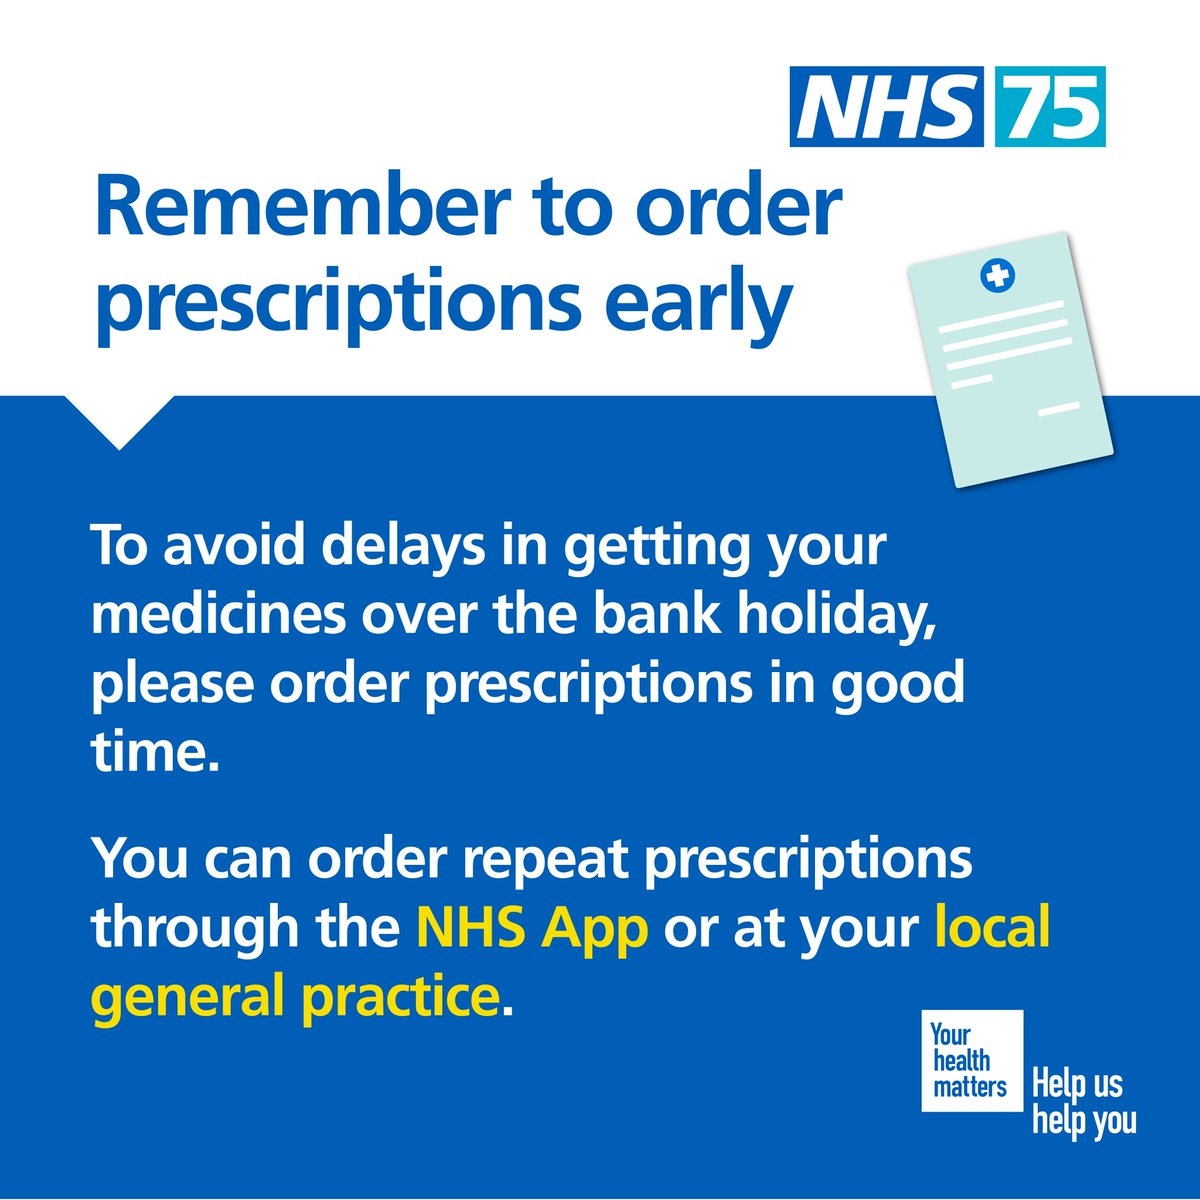 Some local pharmacies may have different opening hours over the bank holiday. Search ‘find a pharmacy NHS’ to find an open pharmacy near you on the day you need access - rb.gy/6fo250